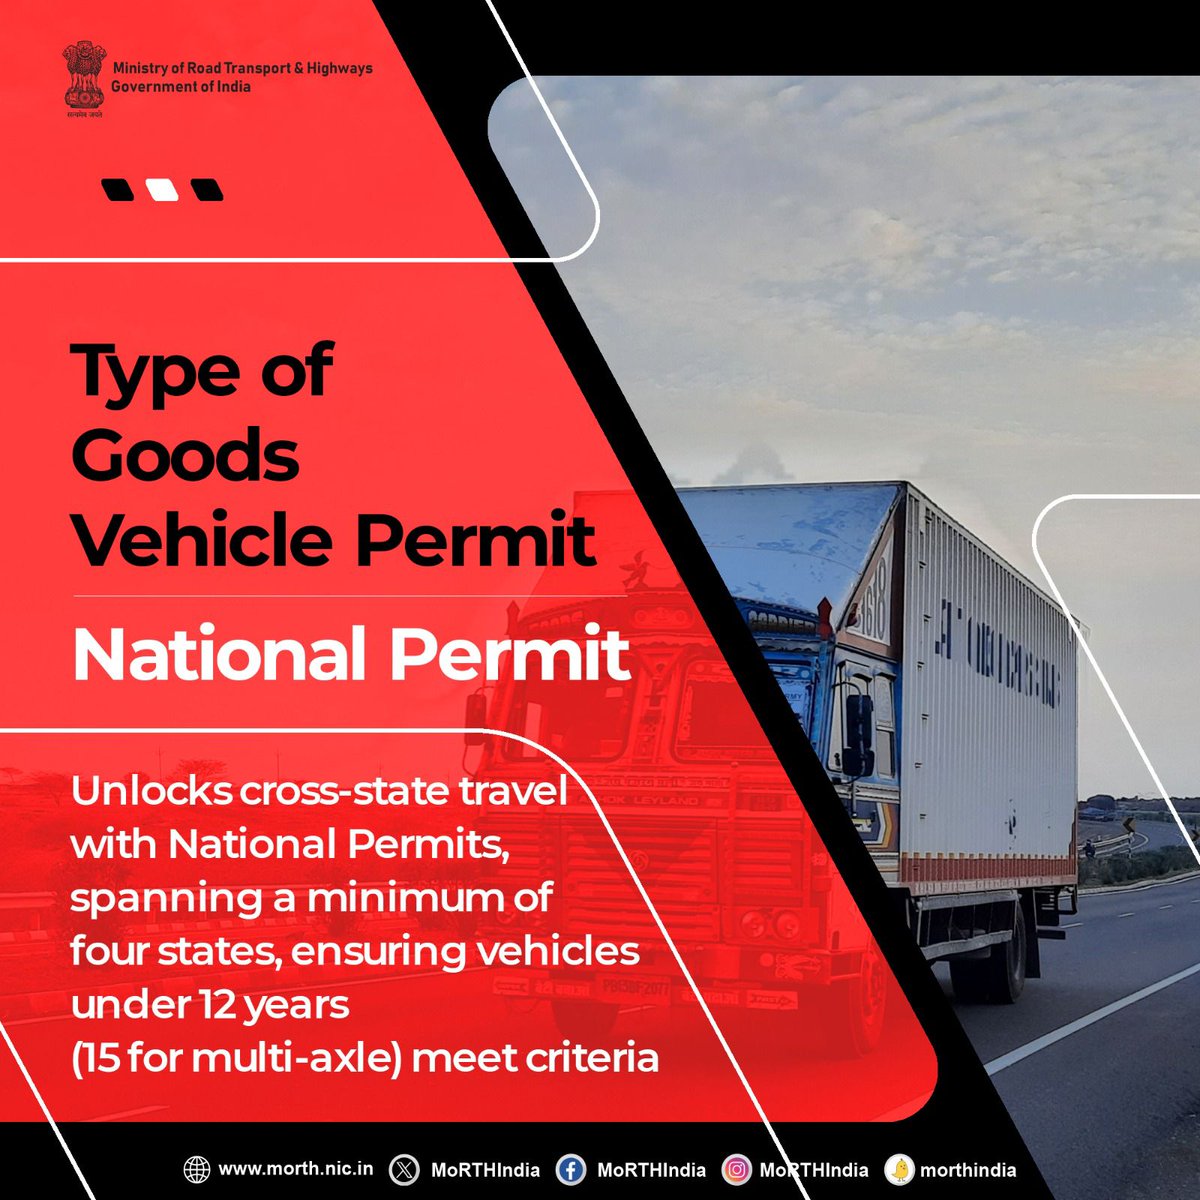 Types of Goods Vehicle Permit: National Permit